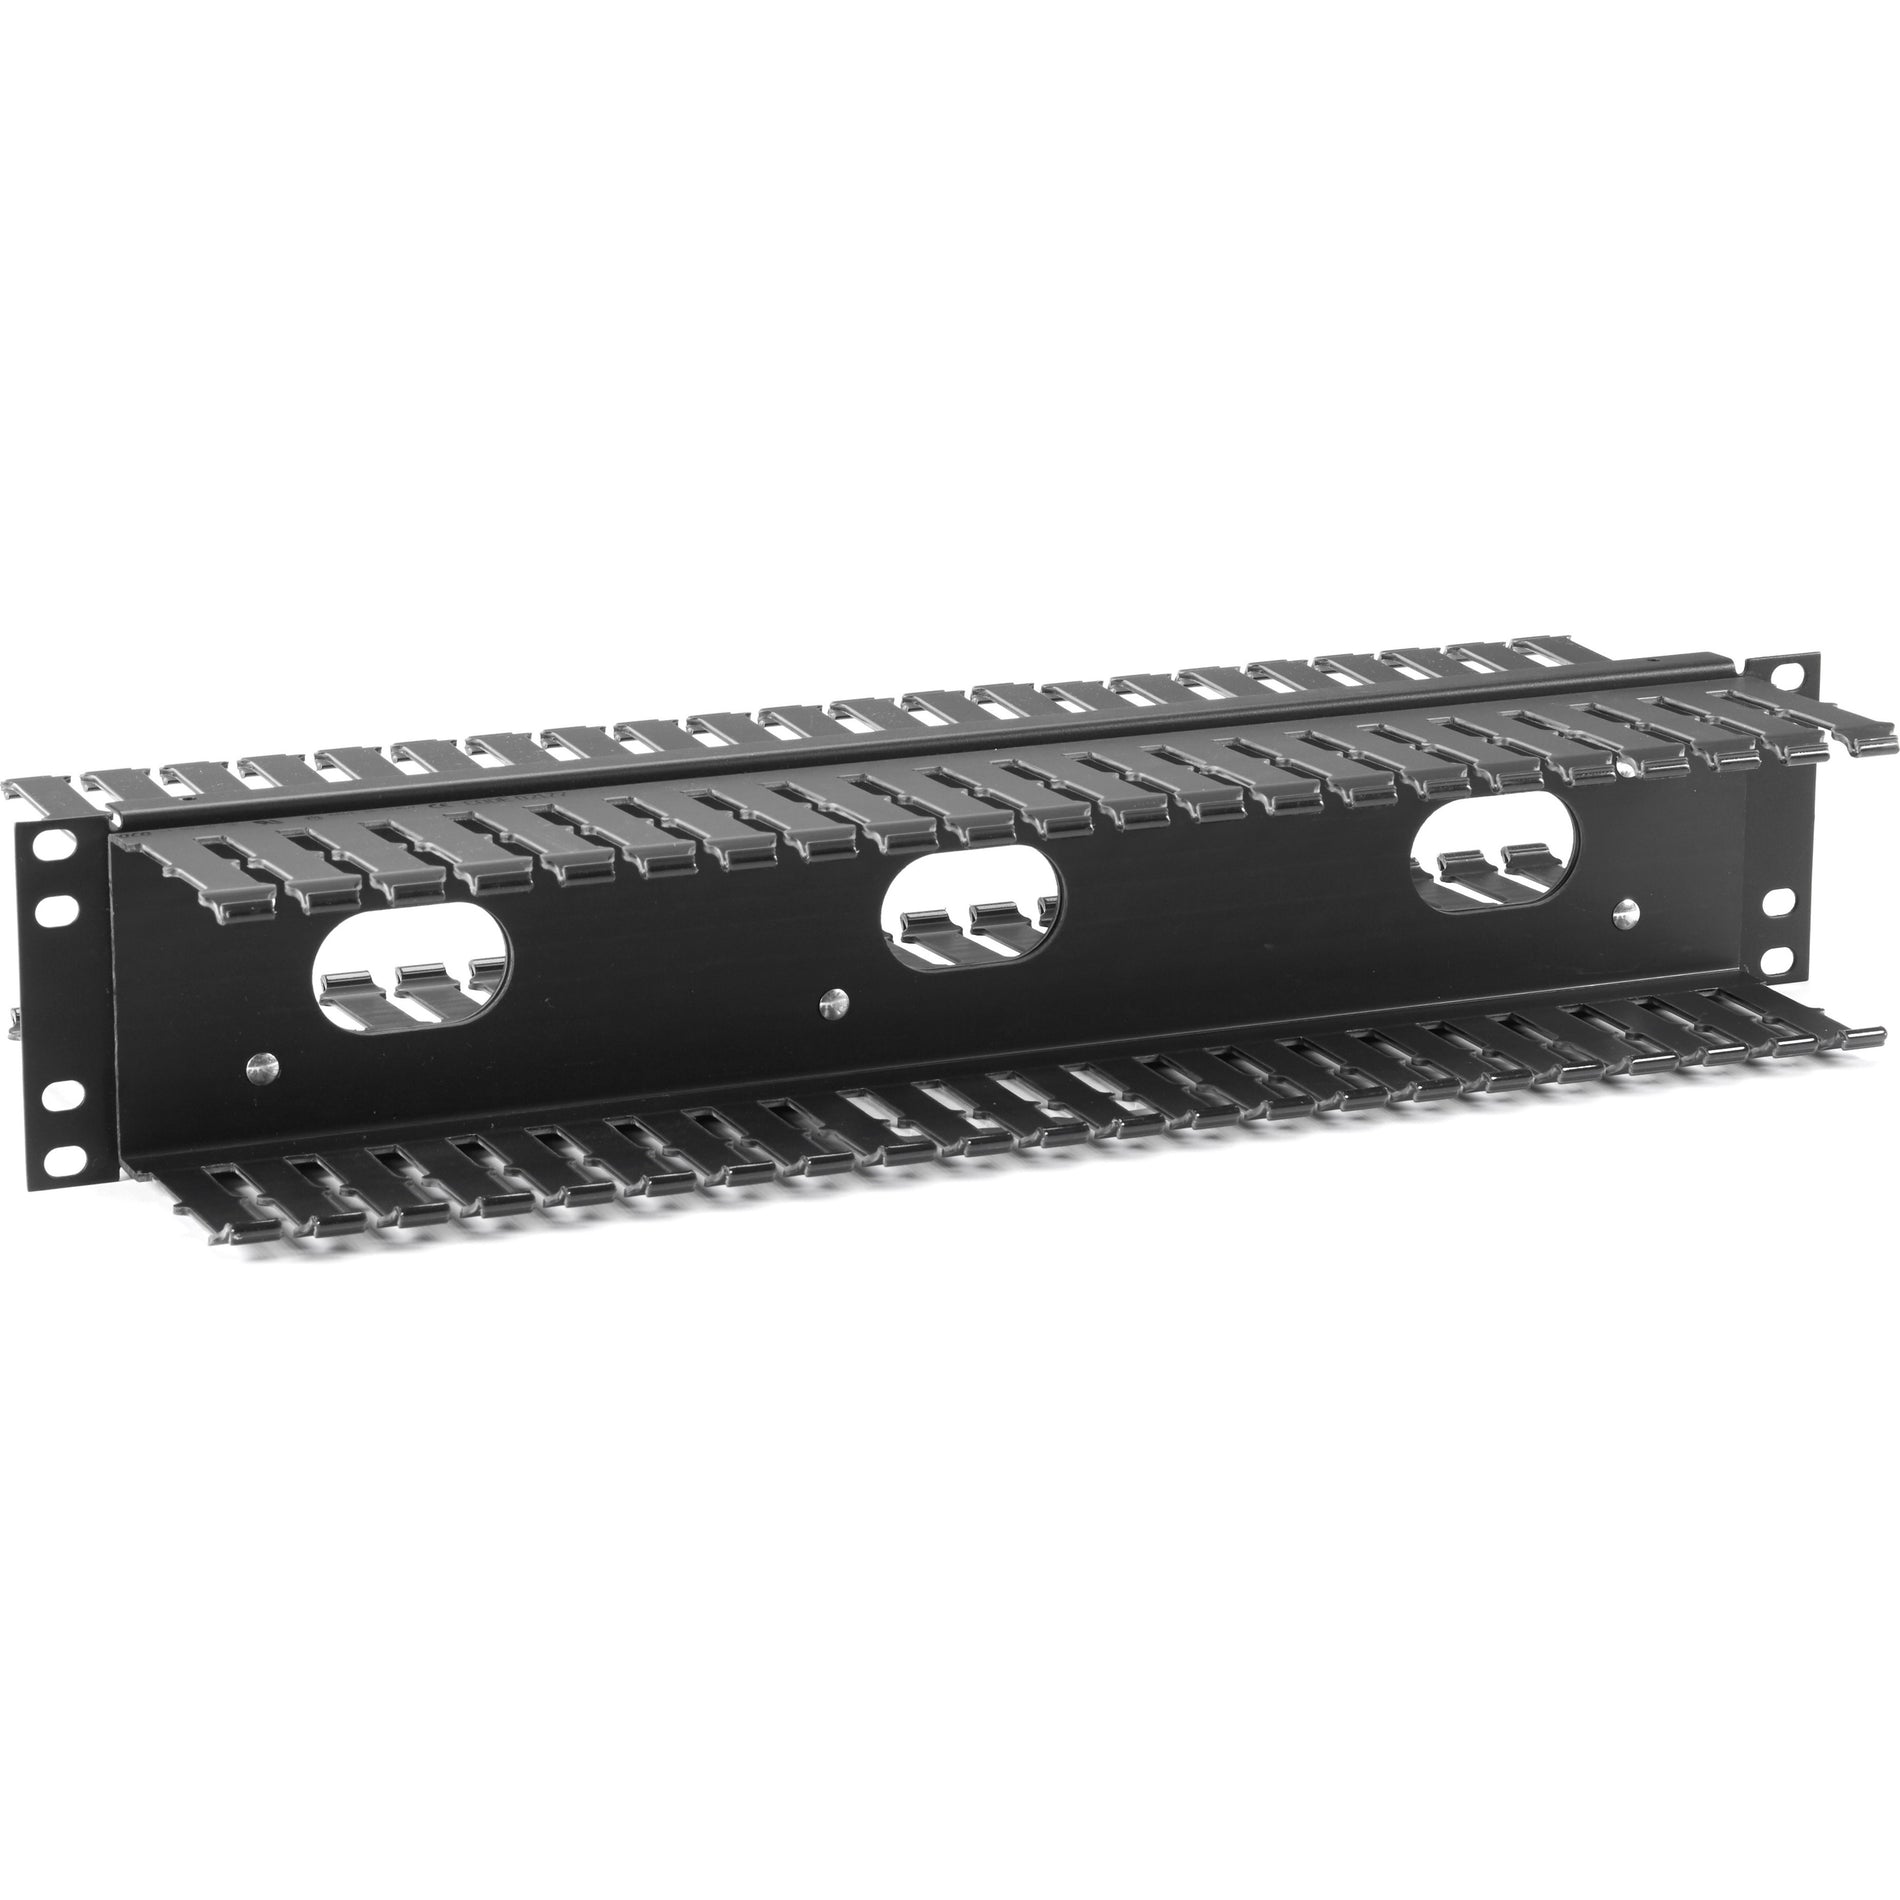 Black Box RMT107A 2U Horizontal 19" IT Rackmount Cable Manager Double-Sided Black, TAA Compliant, Lifetime Warranty